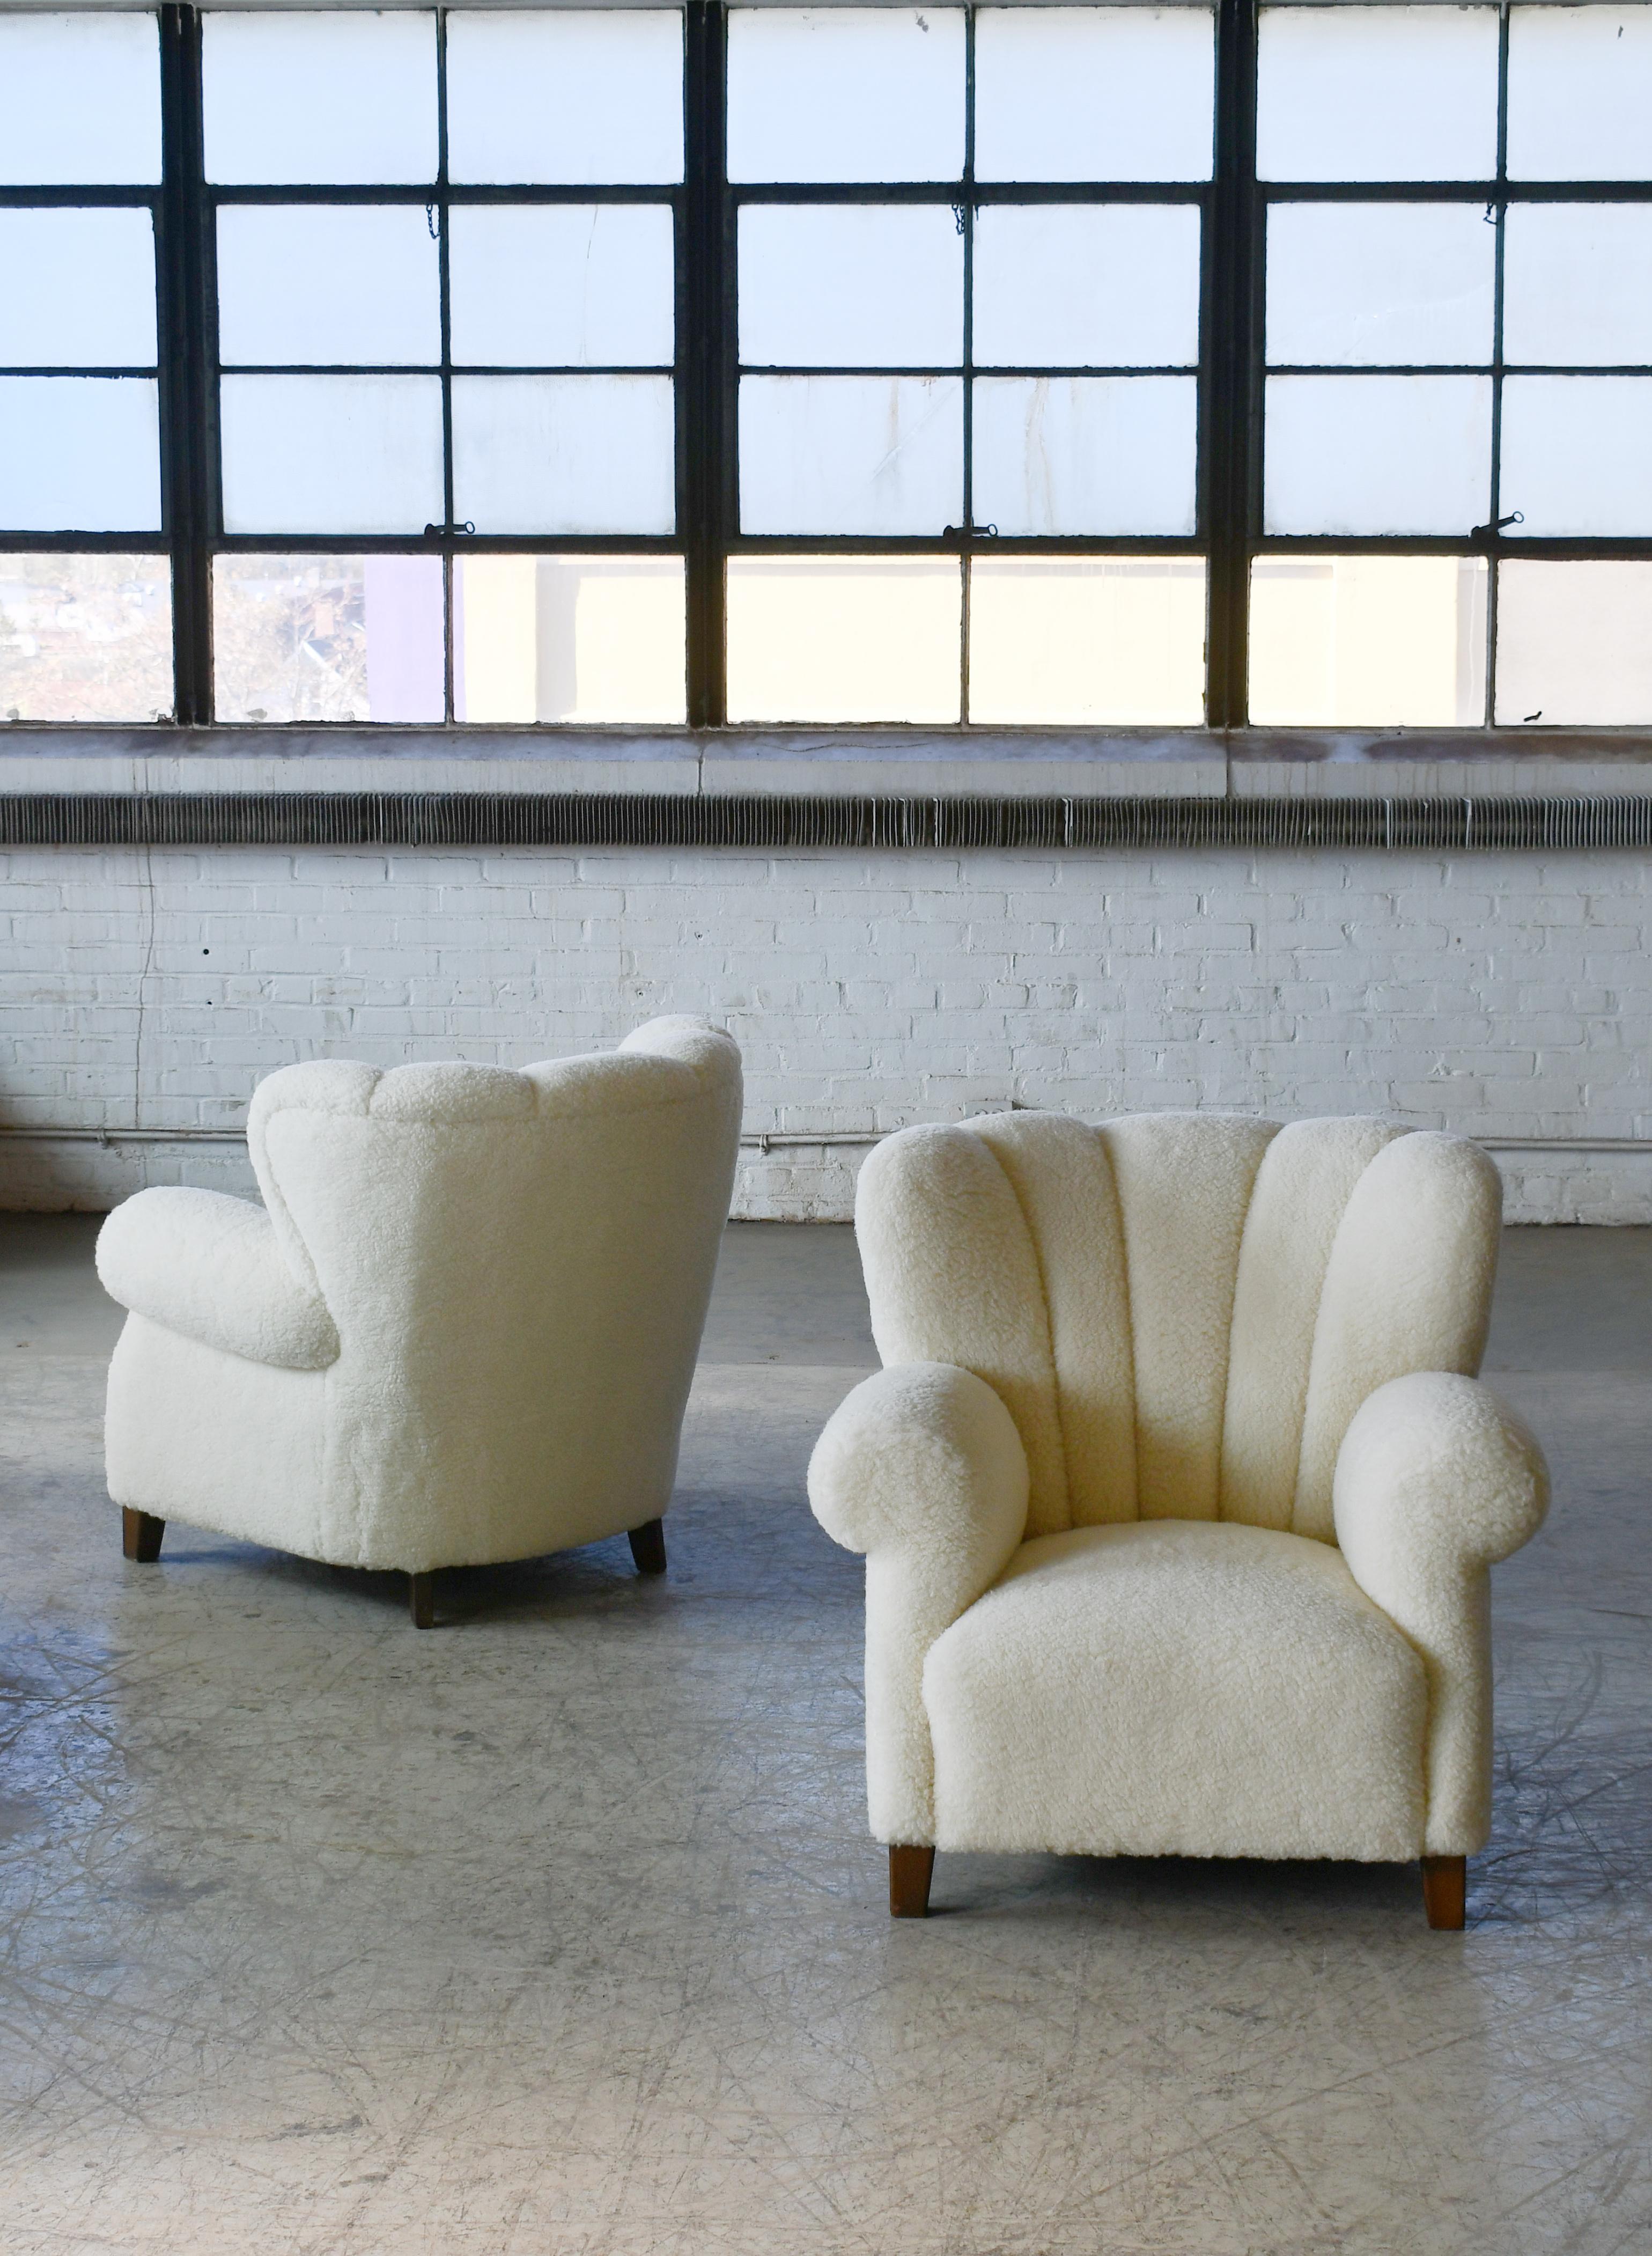 Pair of sublime large scale pair of model 1518 lounge club chairs made by Fritz Hansen in the late 1930s or early 1940s. Superbly comfortable with their dramatically low and wide proportions have charming and very strong presence to anchor any room.